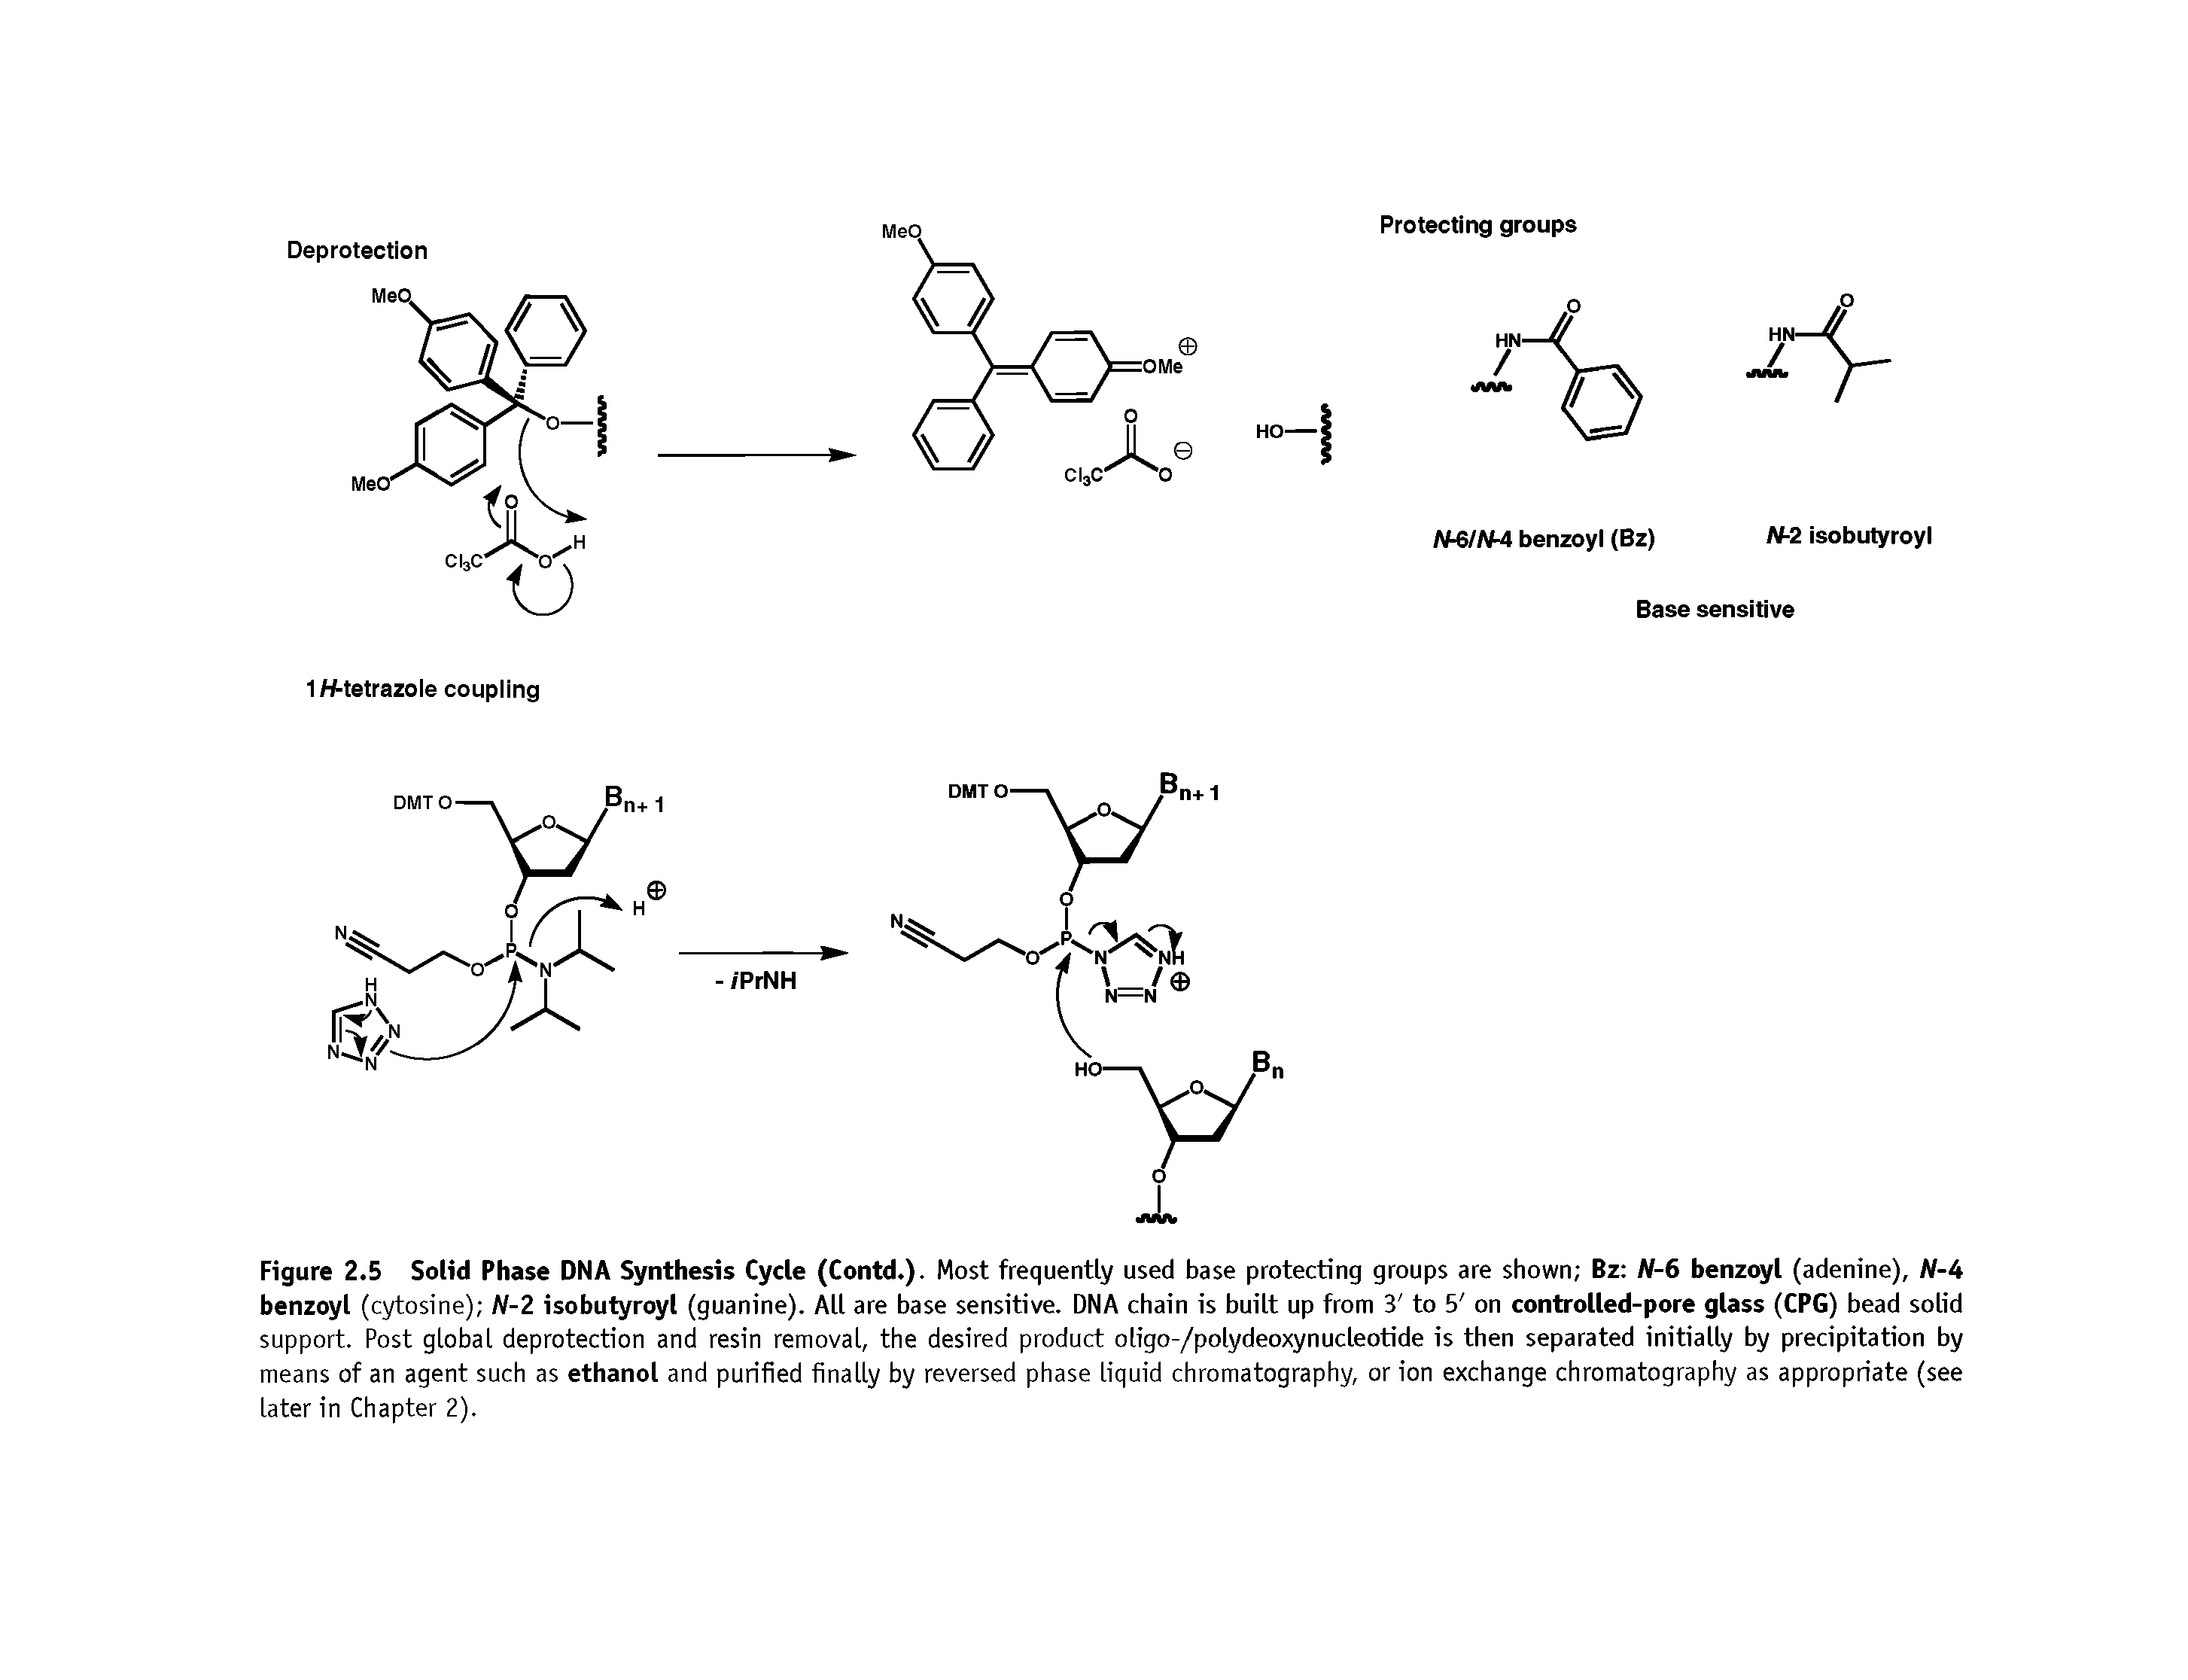 Figure 2.5 Solid Phase DNA Synthesis Cycle (Contd.). Most frequently used base protecting groups are shown Bz Af-6 benzoyl (adenine), W-4 benzoyl (cytosine) N-2 isobutyroyl (guanine). All are base sensitive. DNA chain is built up from 3 to 5 on controlled-pore glass (CPG) bead solid support. Post global deprotection and resin removal, the desired product oligo-/polydeoxynucleotide is then separated initially by precipitation by means of an agent such as ethanol and purified finally by reversed phase liquid chromatography, or ion exchange chromatography as appropriate (see later in Chapter 2).